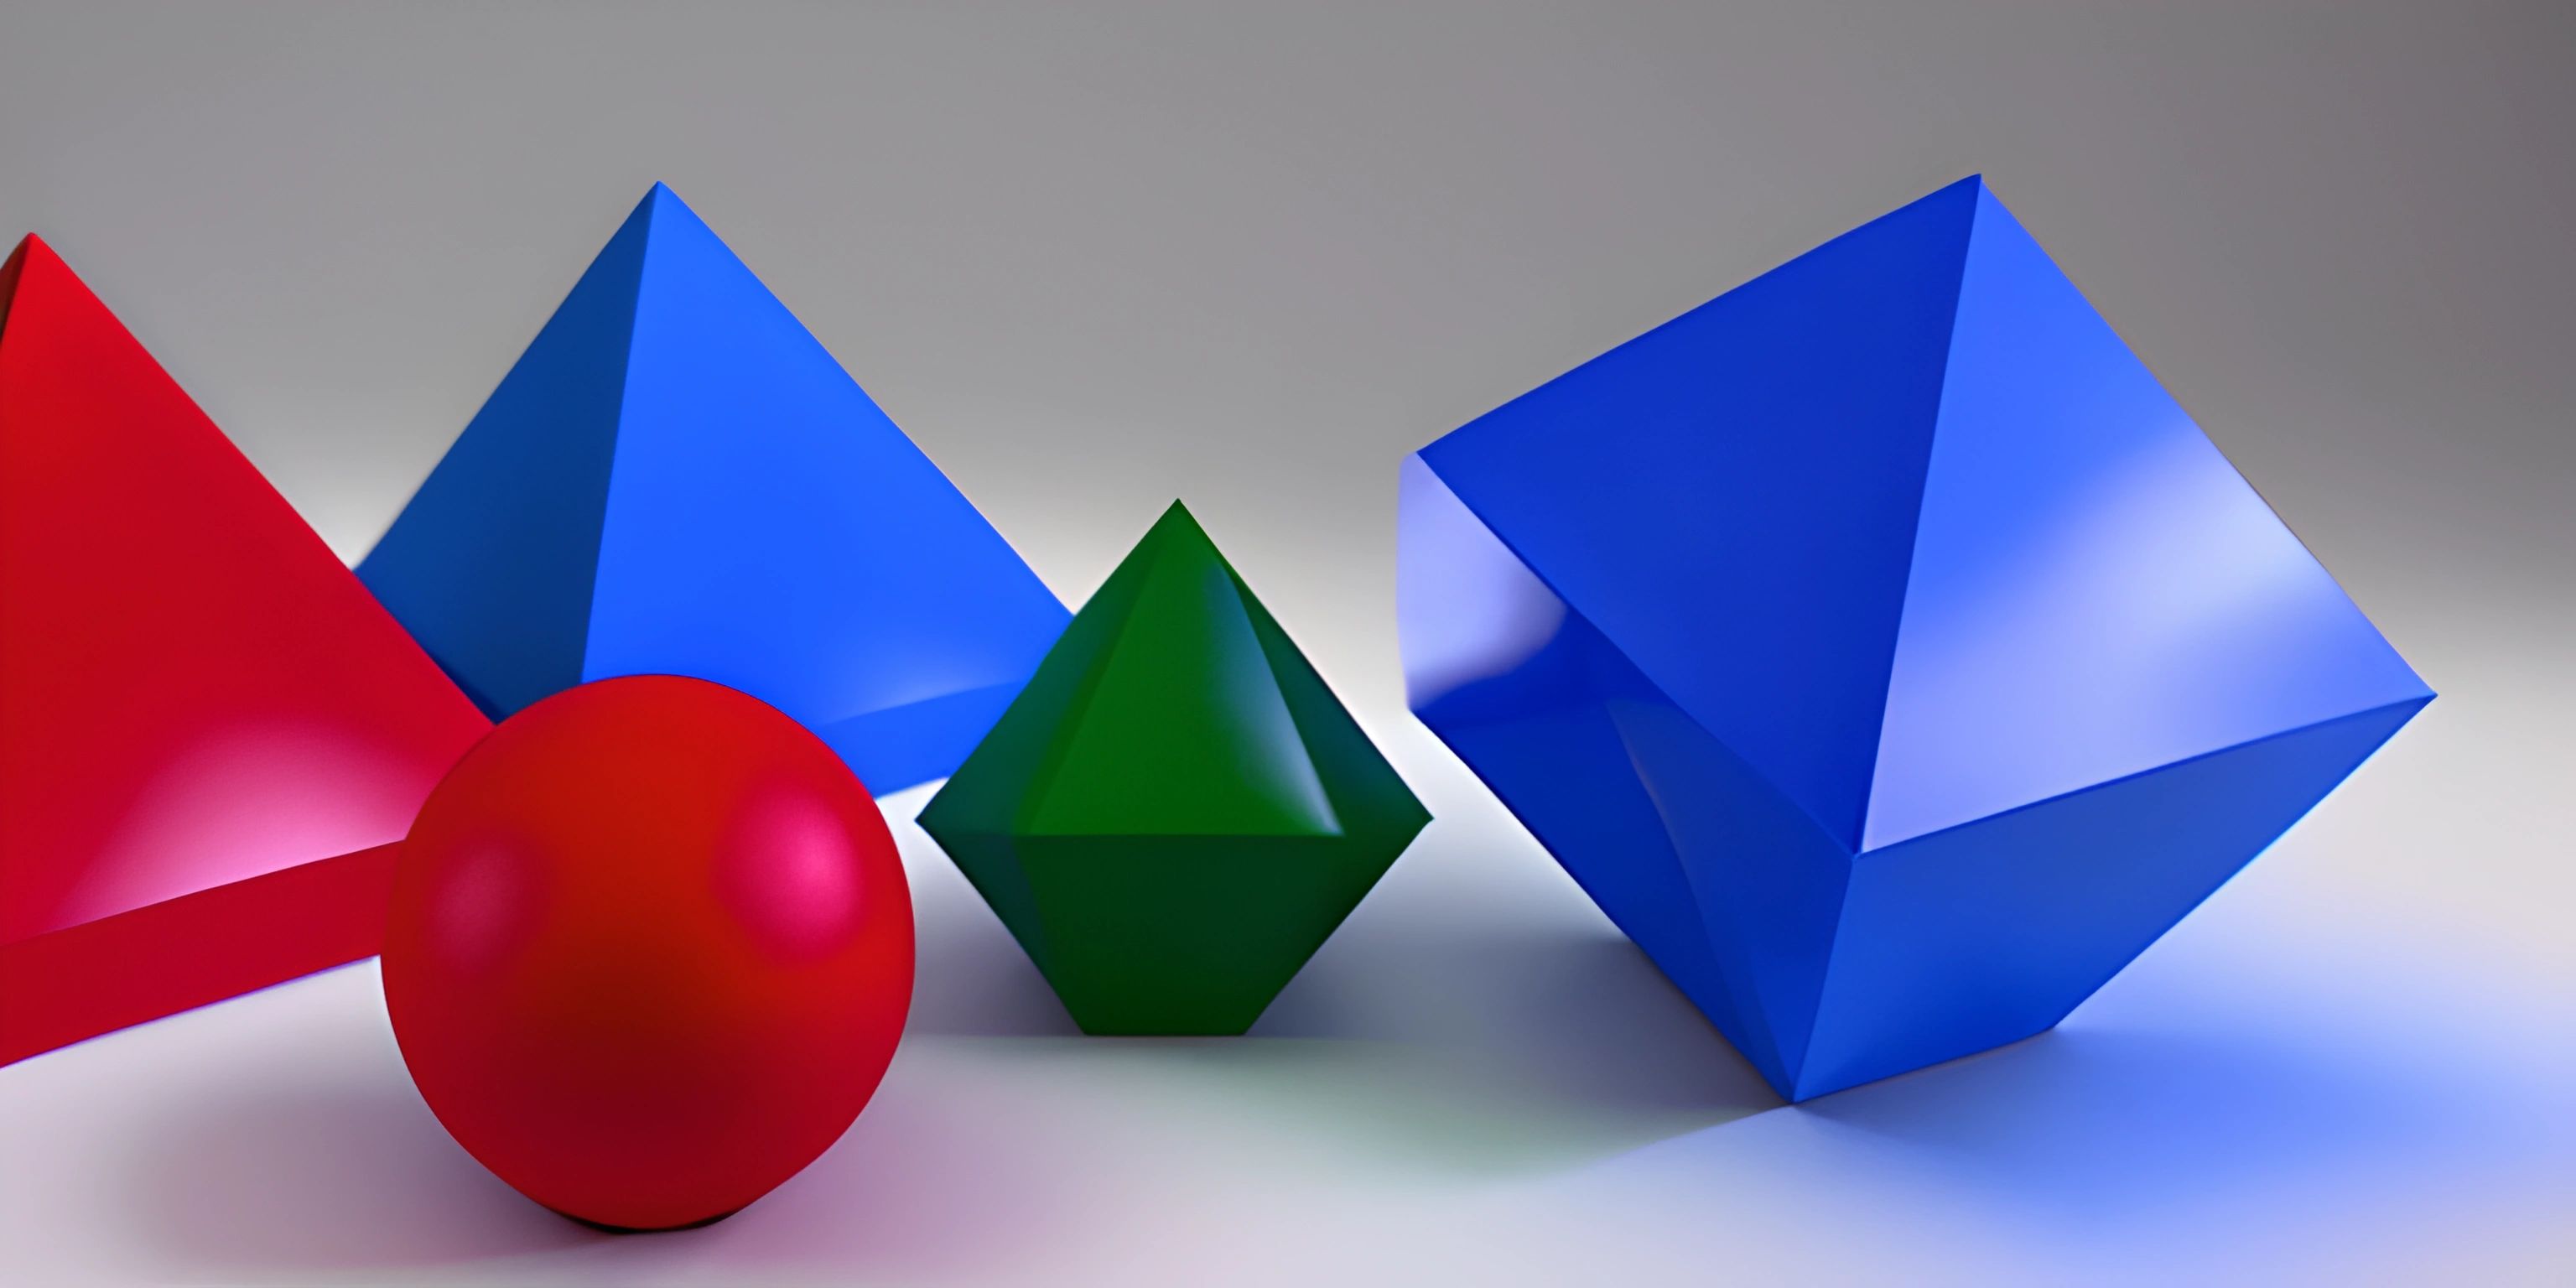 two pyramids are standing beside a red sphere and blue pentagons on a grey background